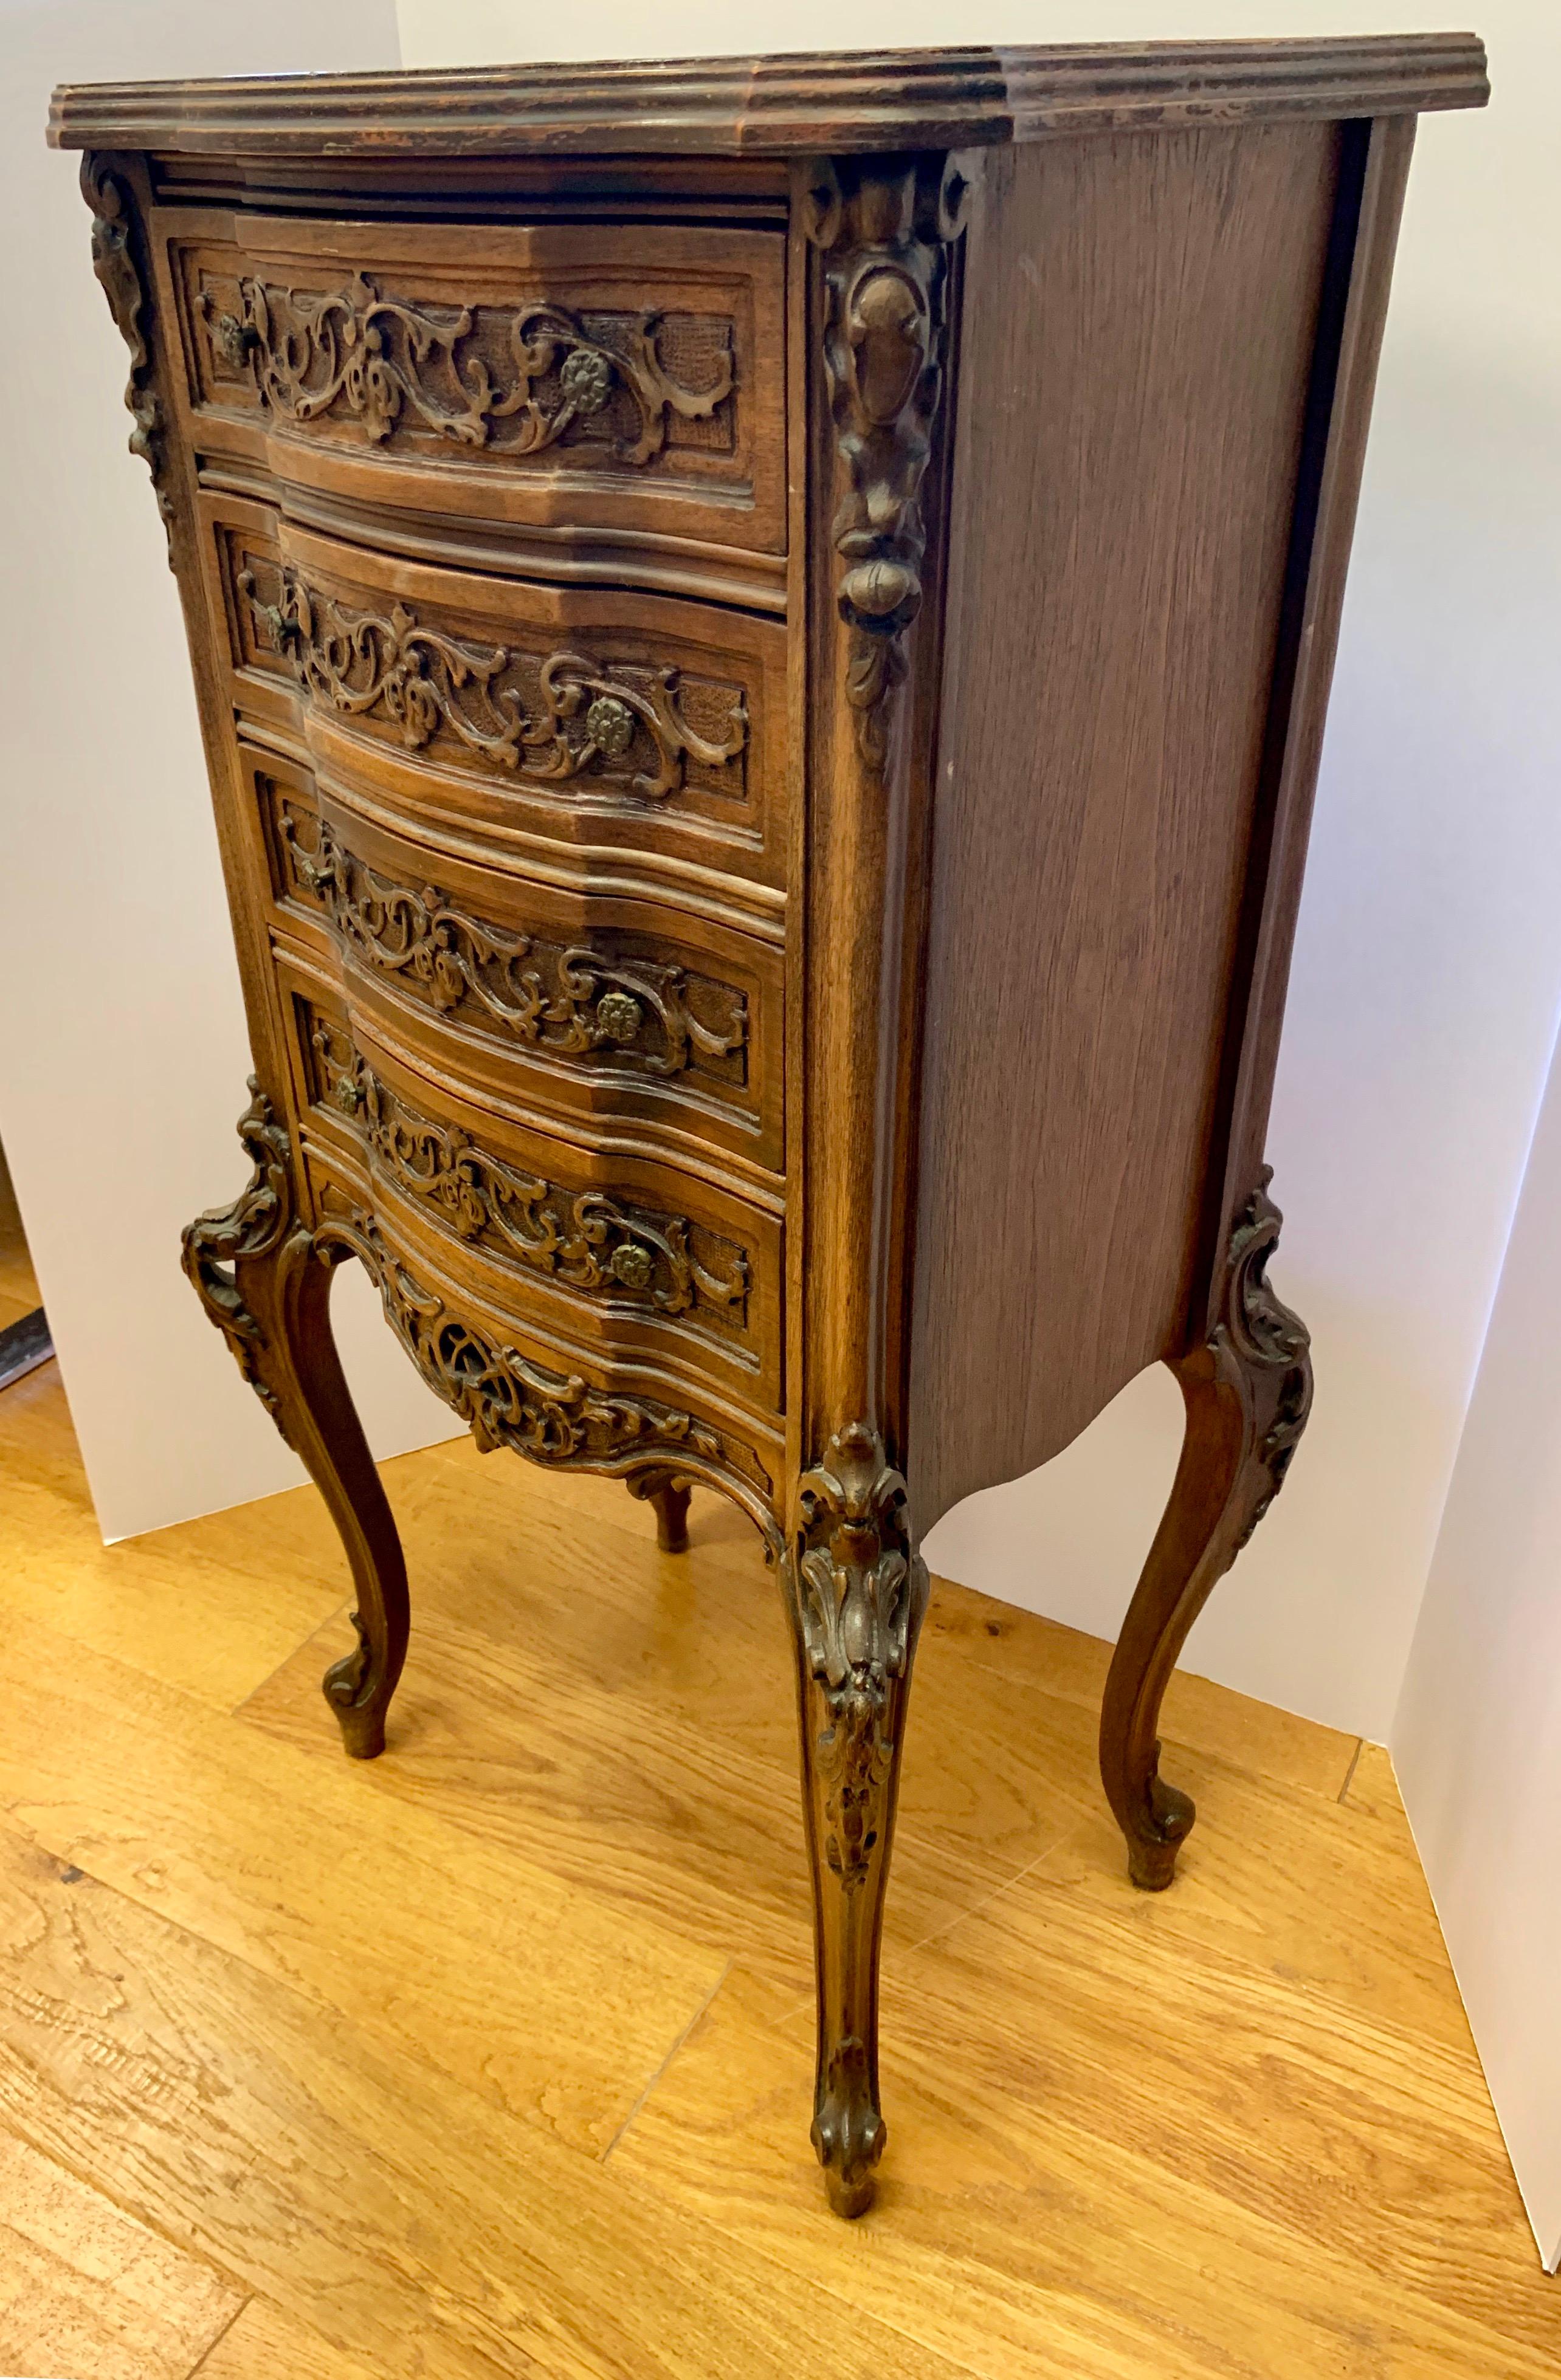 Elegant mahogany four drawer chest of drawers with intricate carvings throughout.